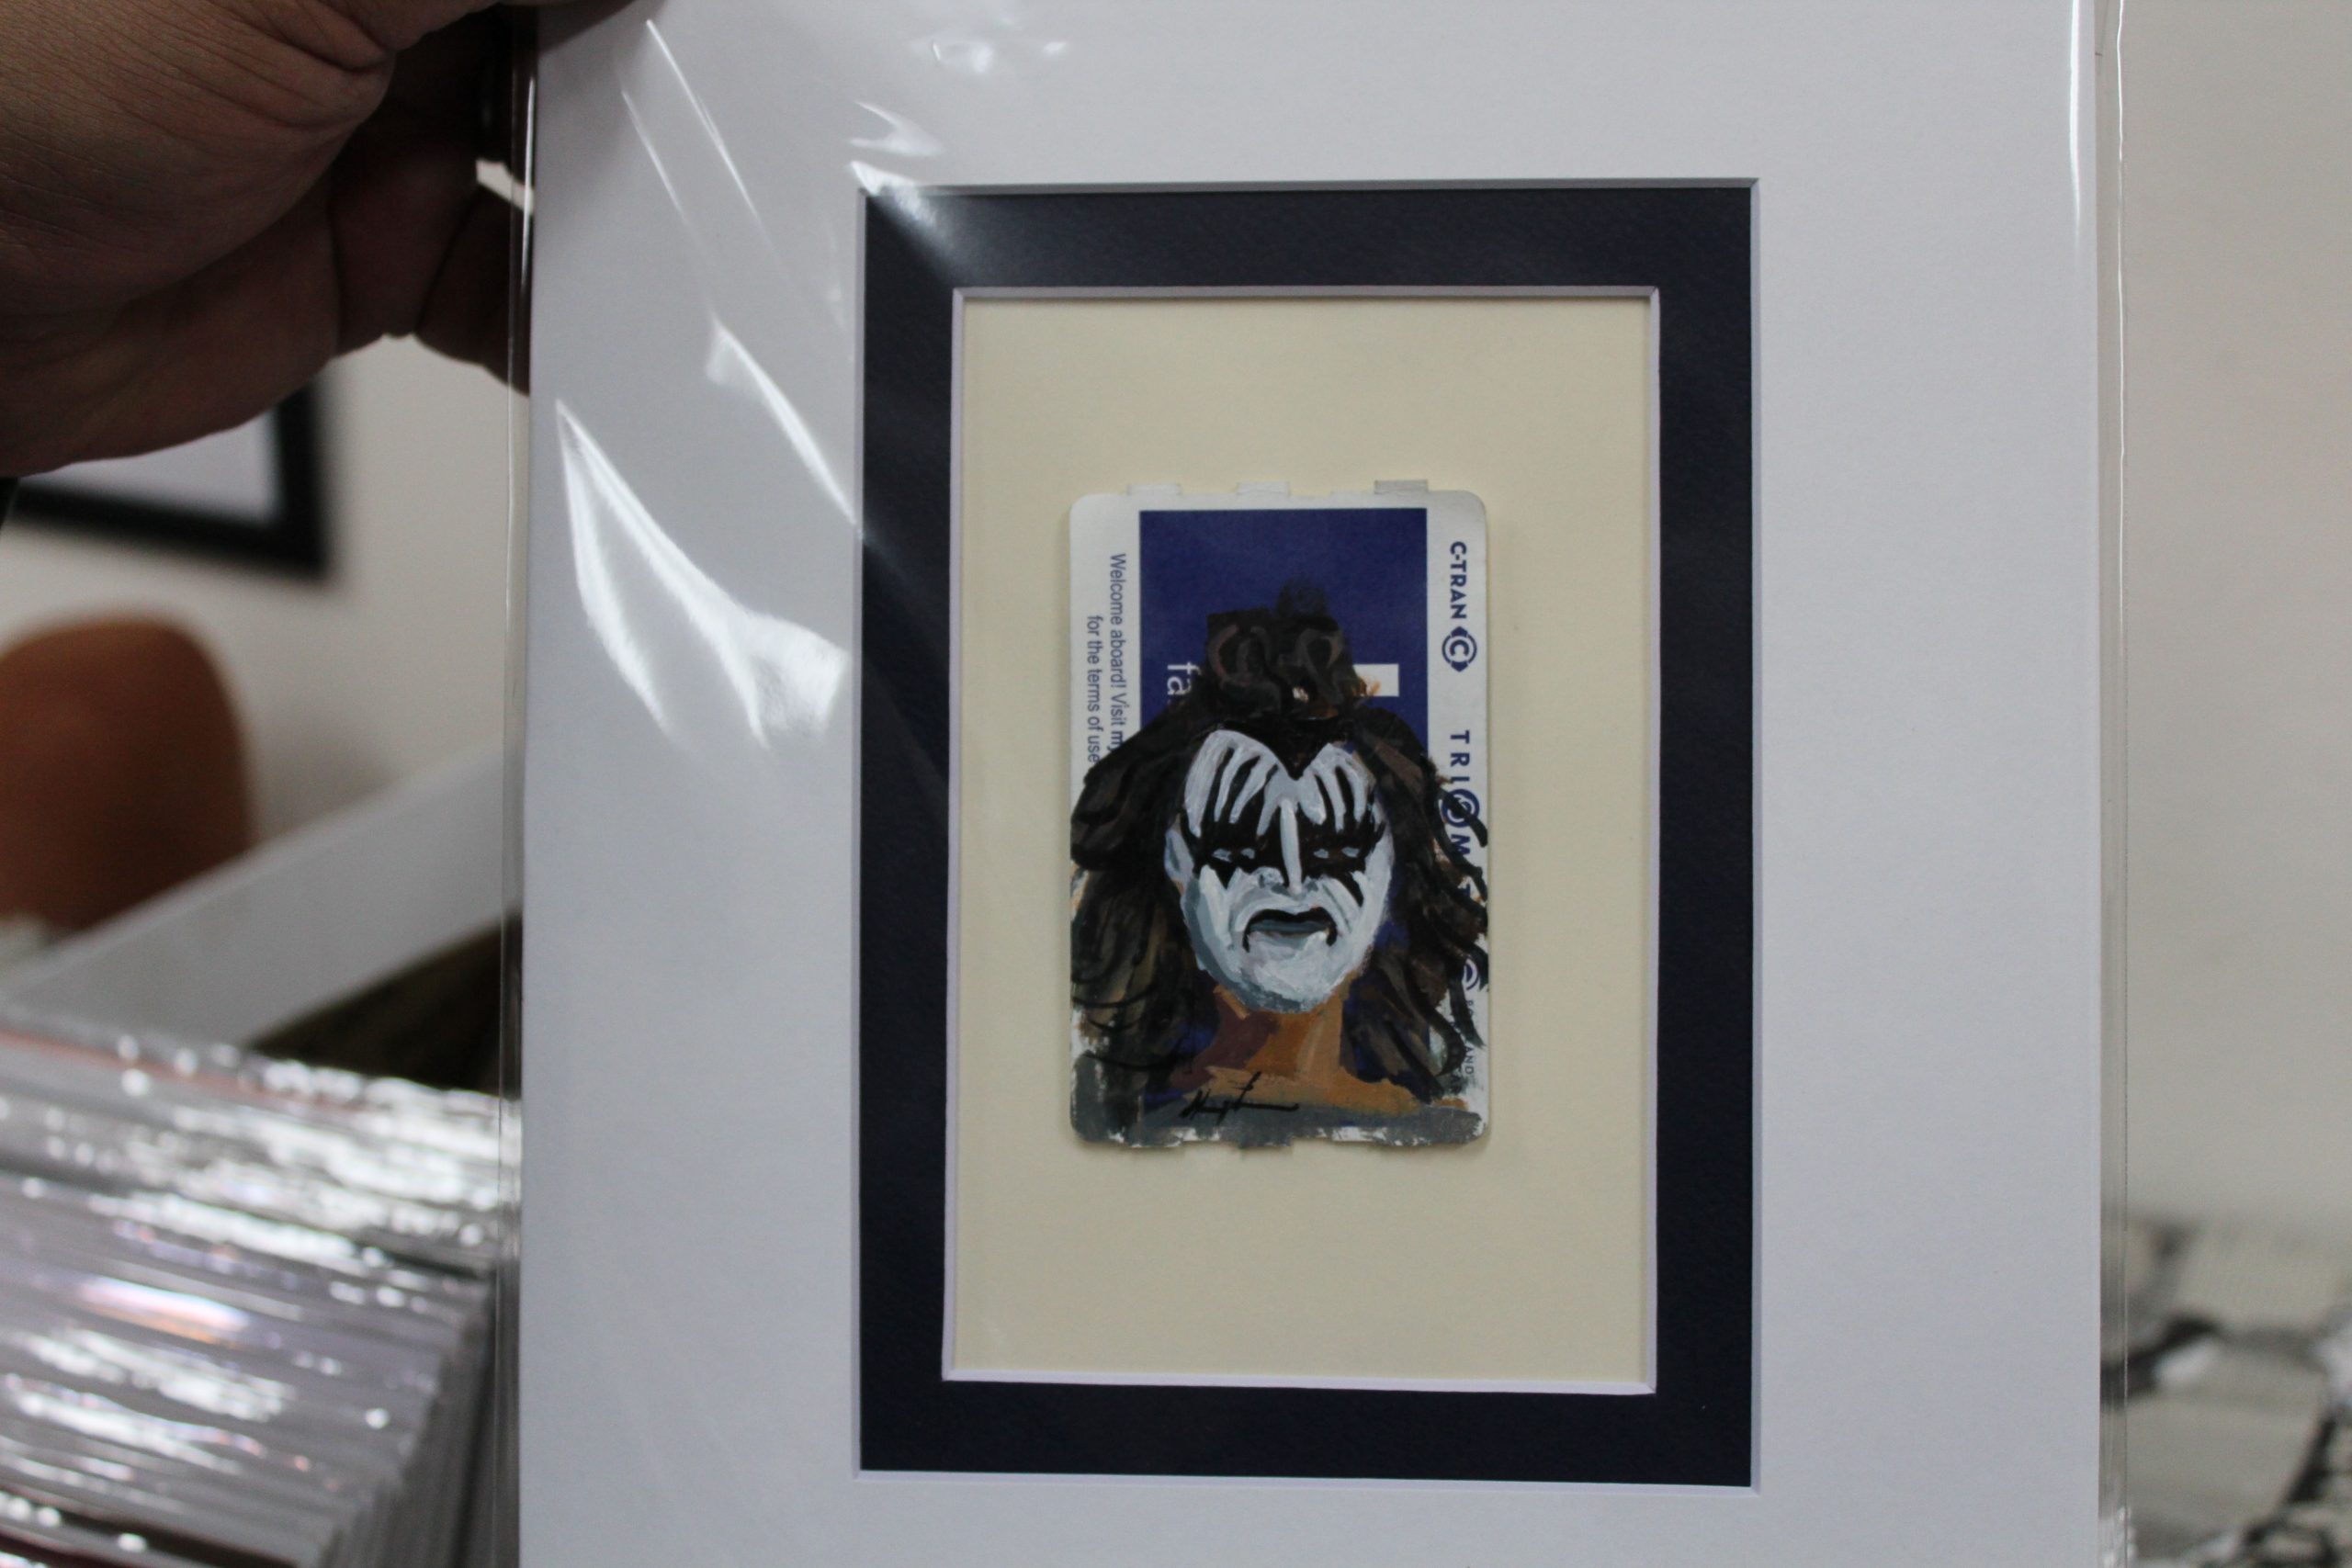 Painting of Gene Simmons of KISS painted on a TriMet ticket